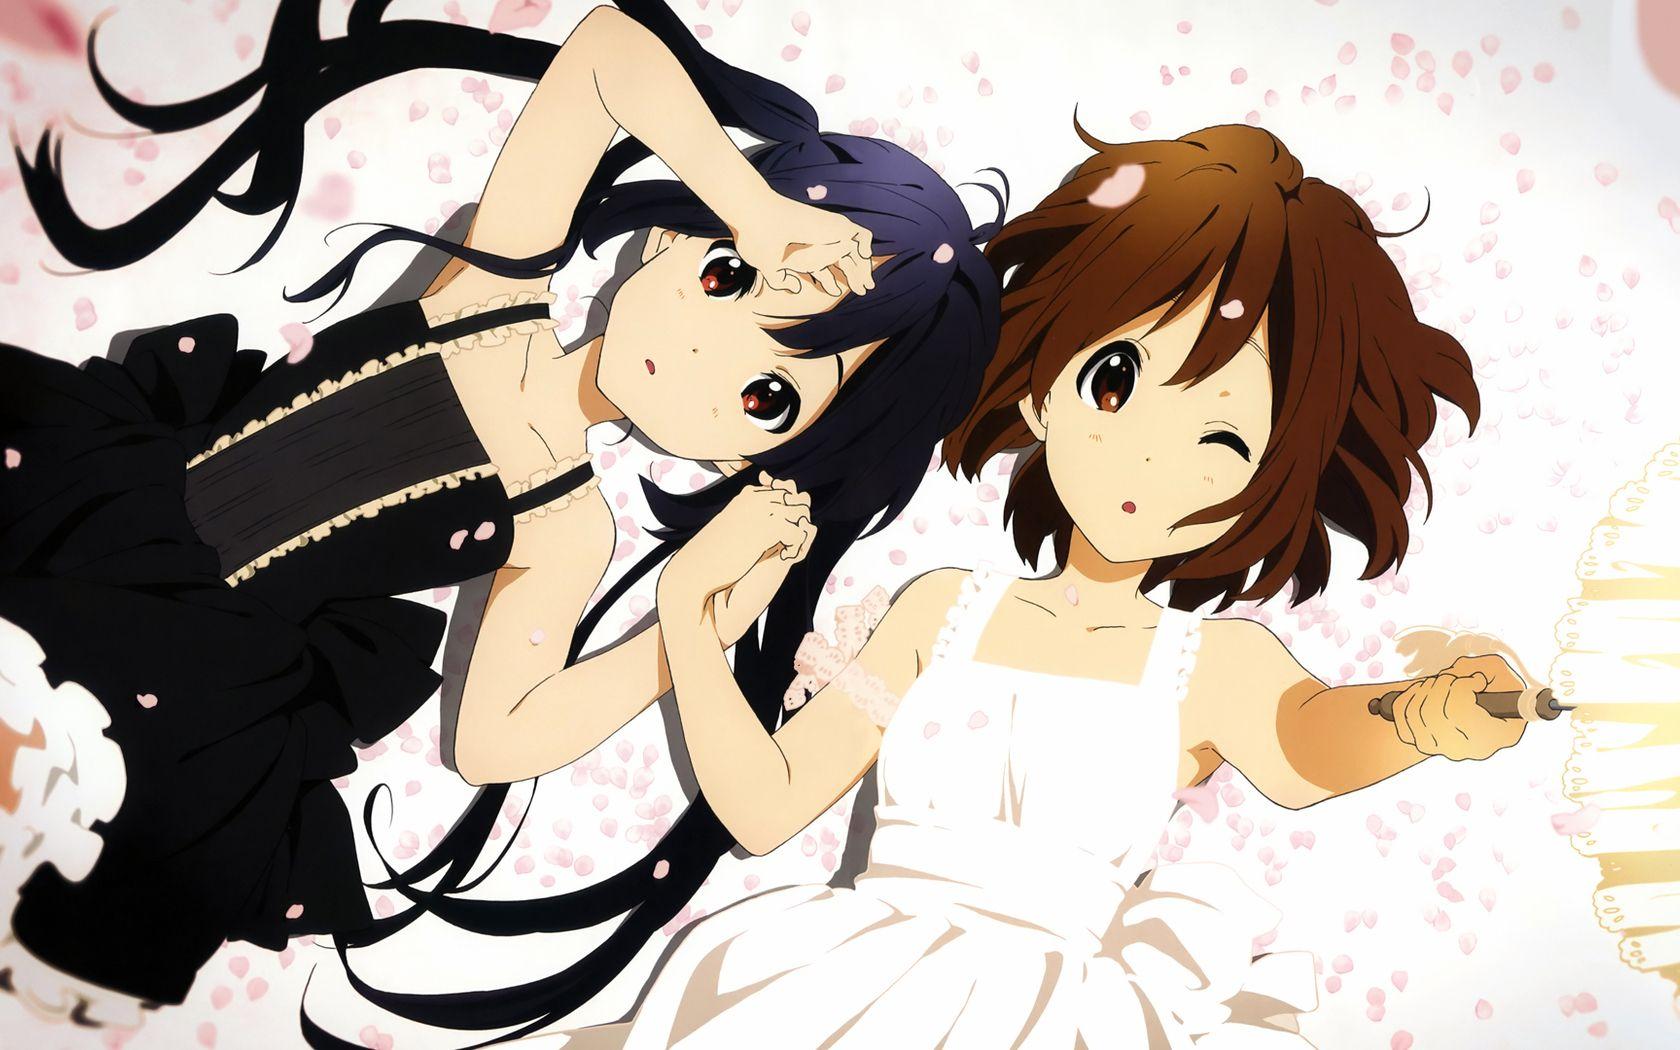 Two Anime Girls Wallpaper. Anime best friends, Anime, Two anime